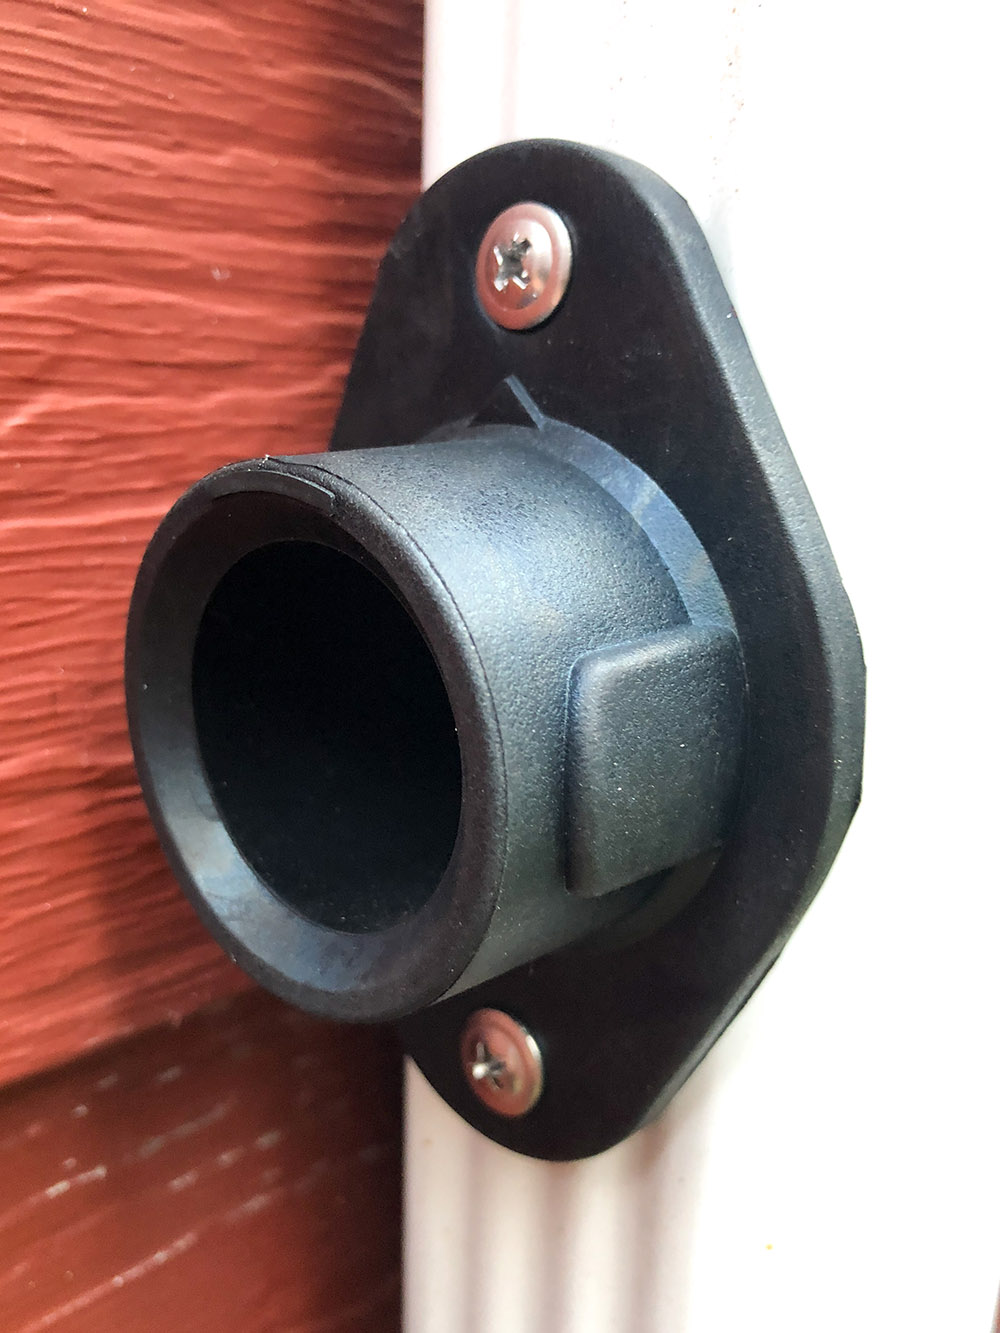 A diverter installed into a white downspout.